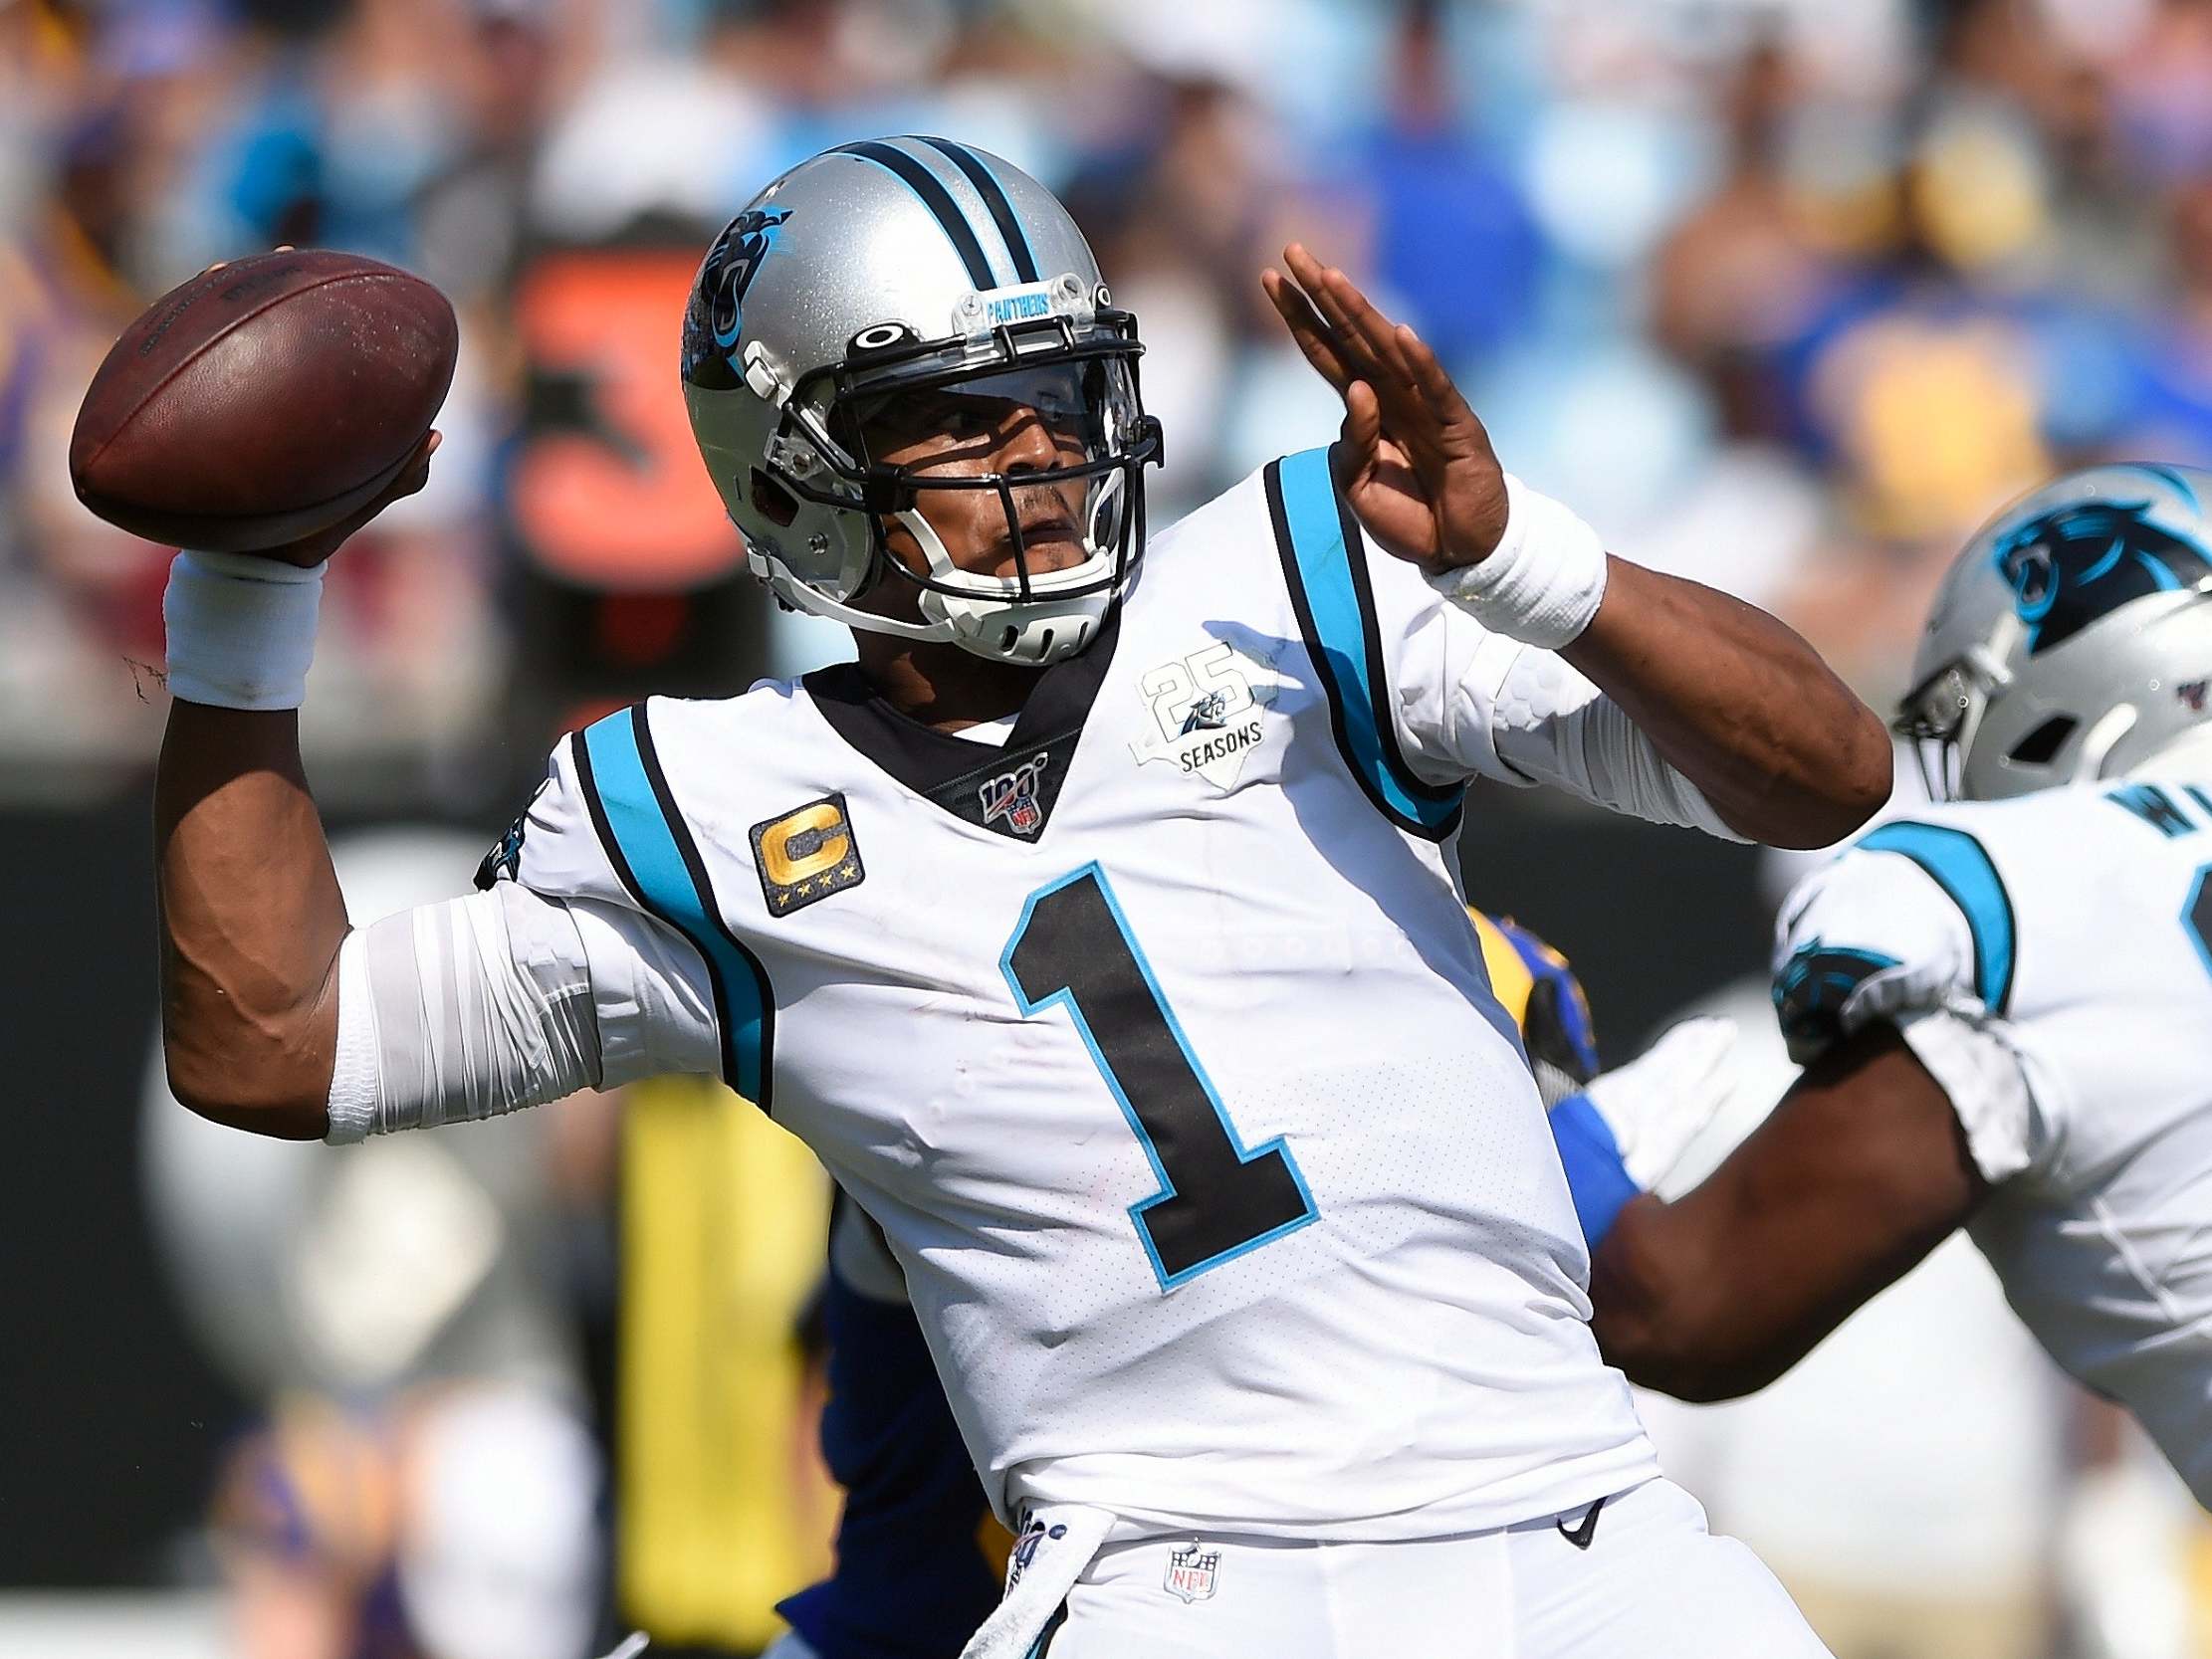 New England Patriots sign Cam Newton on one-year deal but receive $1.1m  fine for filming Bengals, The Independent